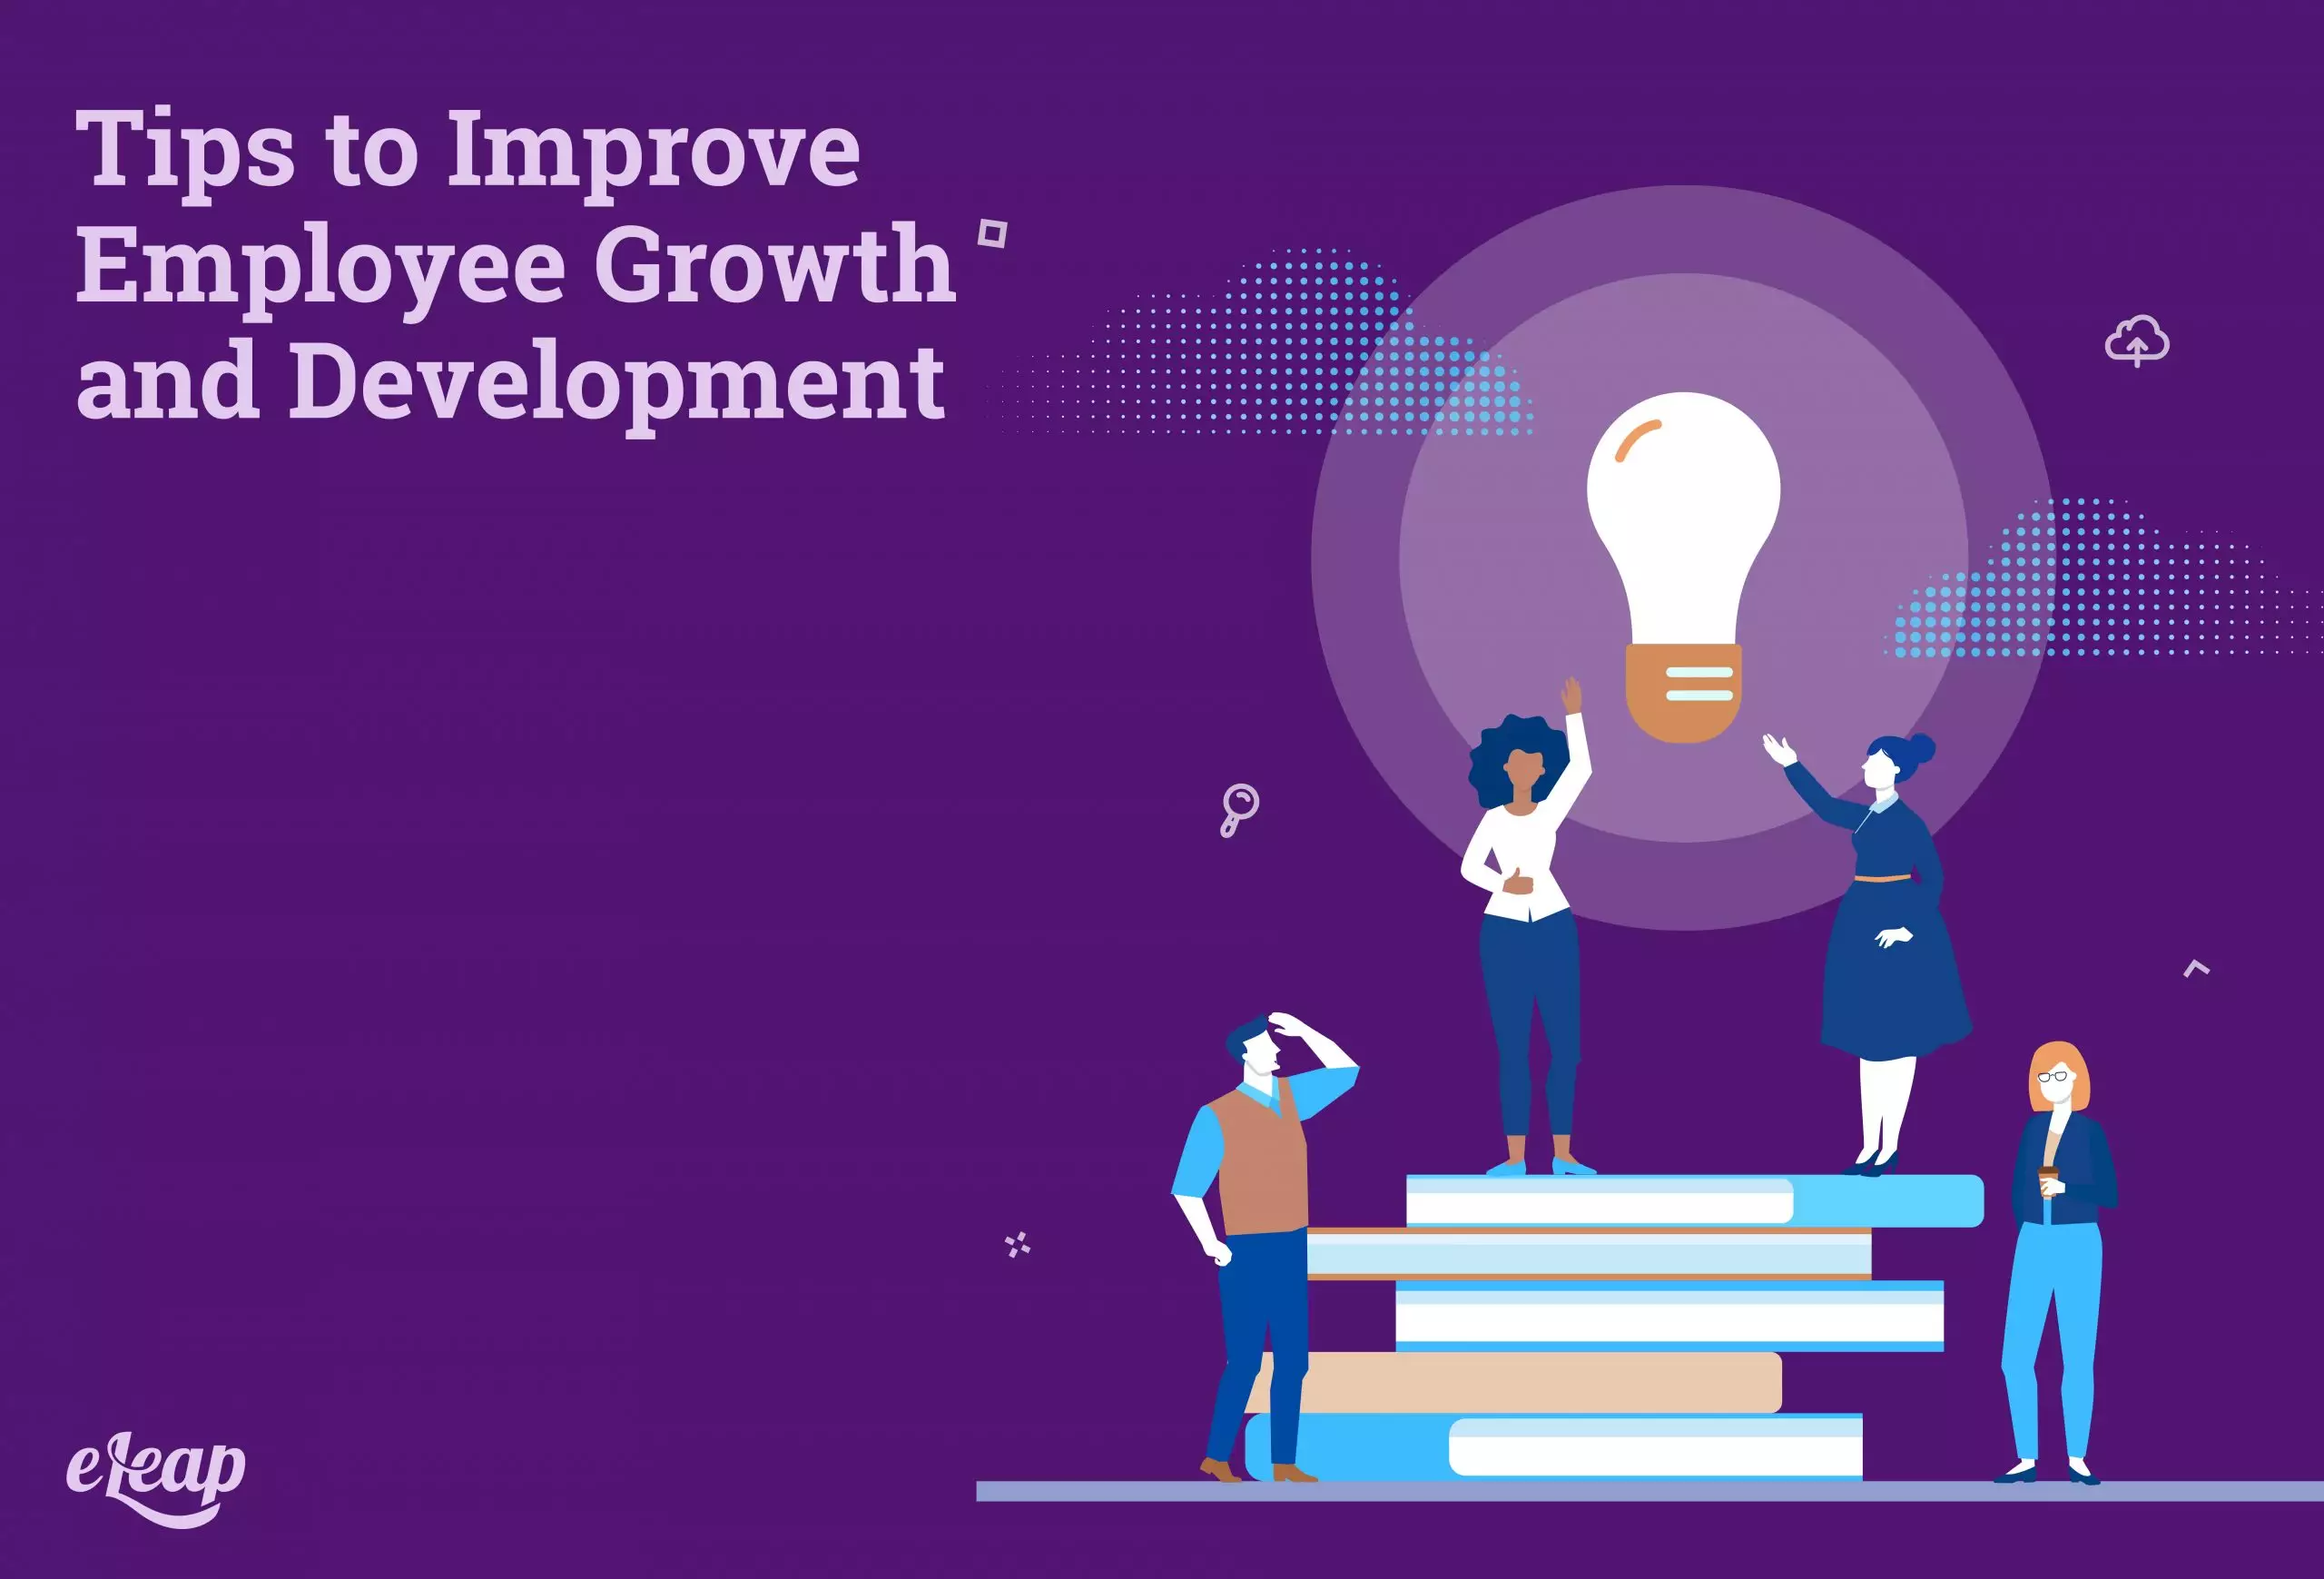 Tips to Improve Employee Growth and Development